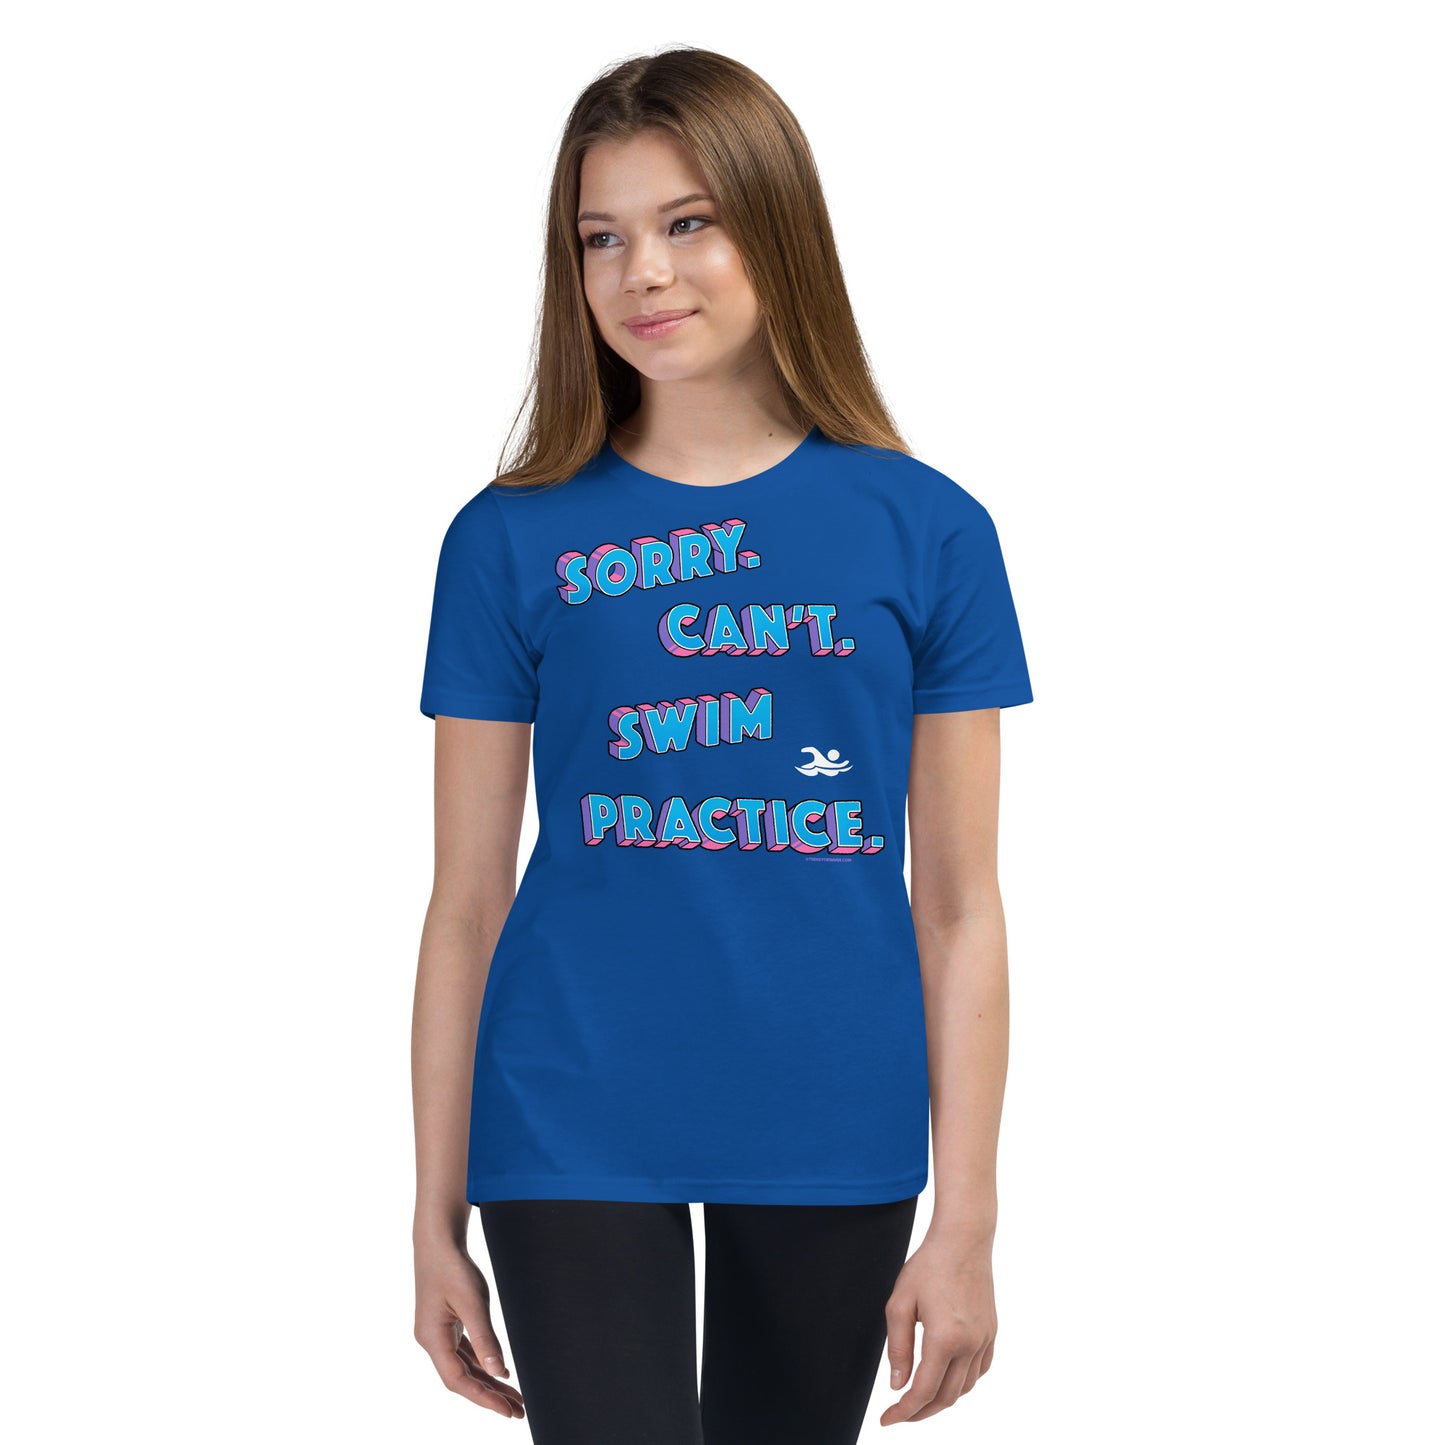 Sorry Can't Swim Practice Youth T Shirt - TrendySwimmer